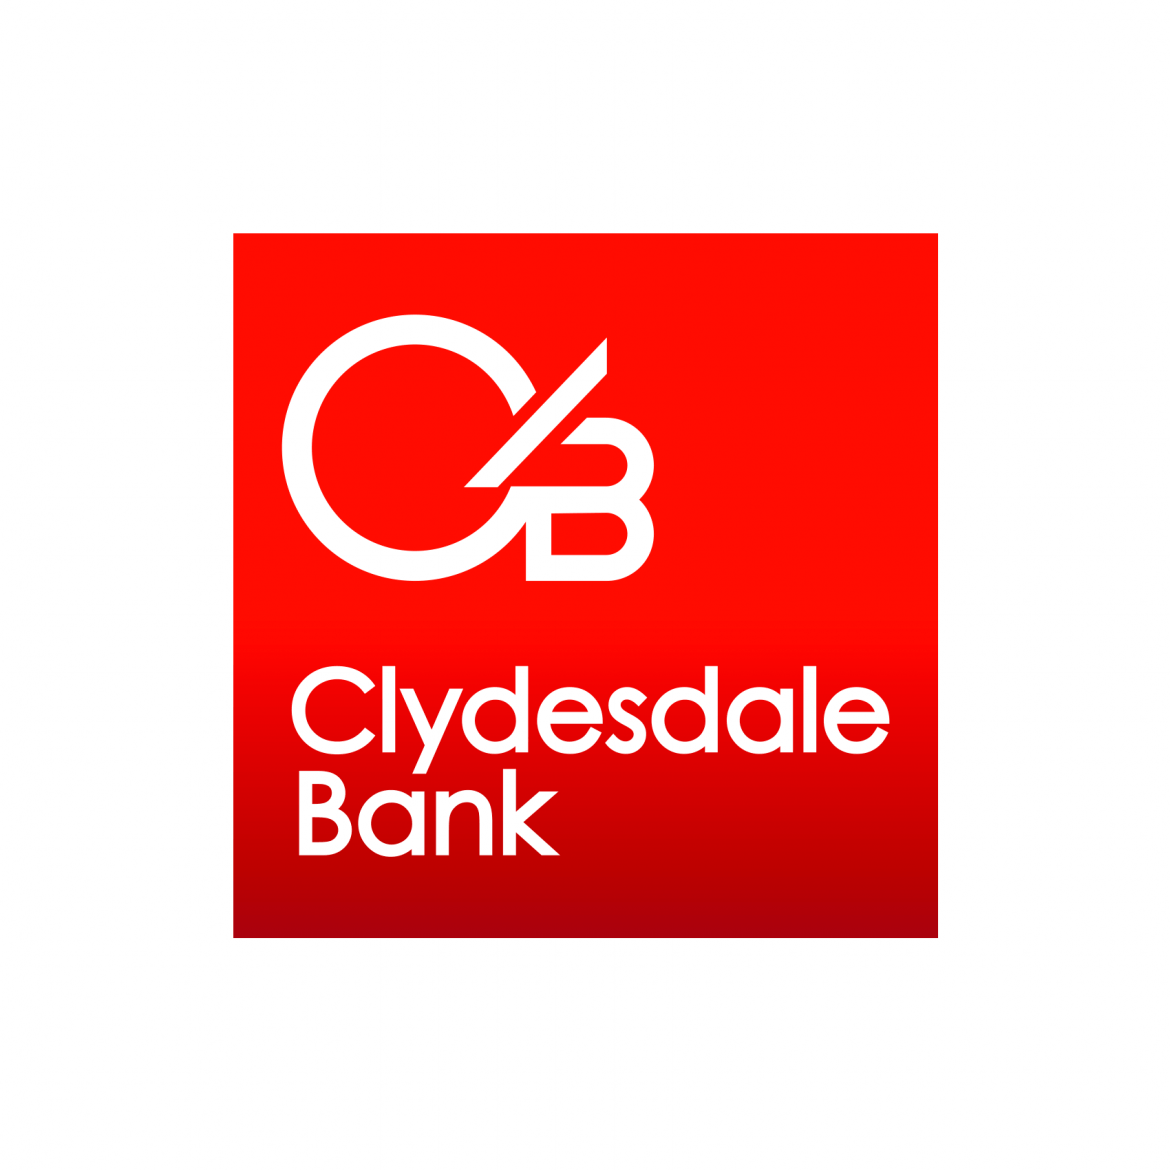 Clydesdale Logo - Clydesdale Bank Uniform Printed Textile Commission - Aimee Kent